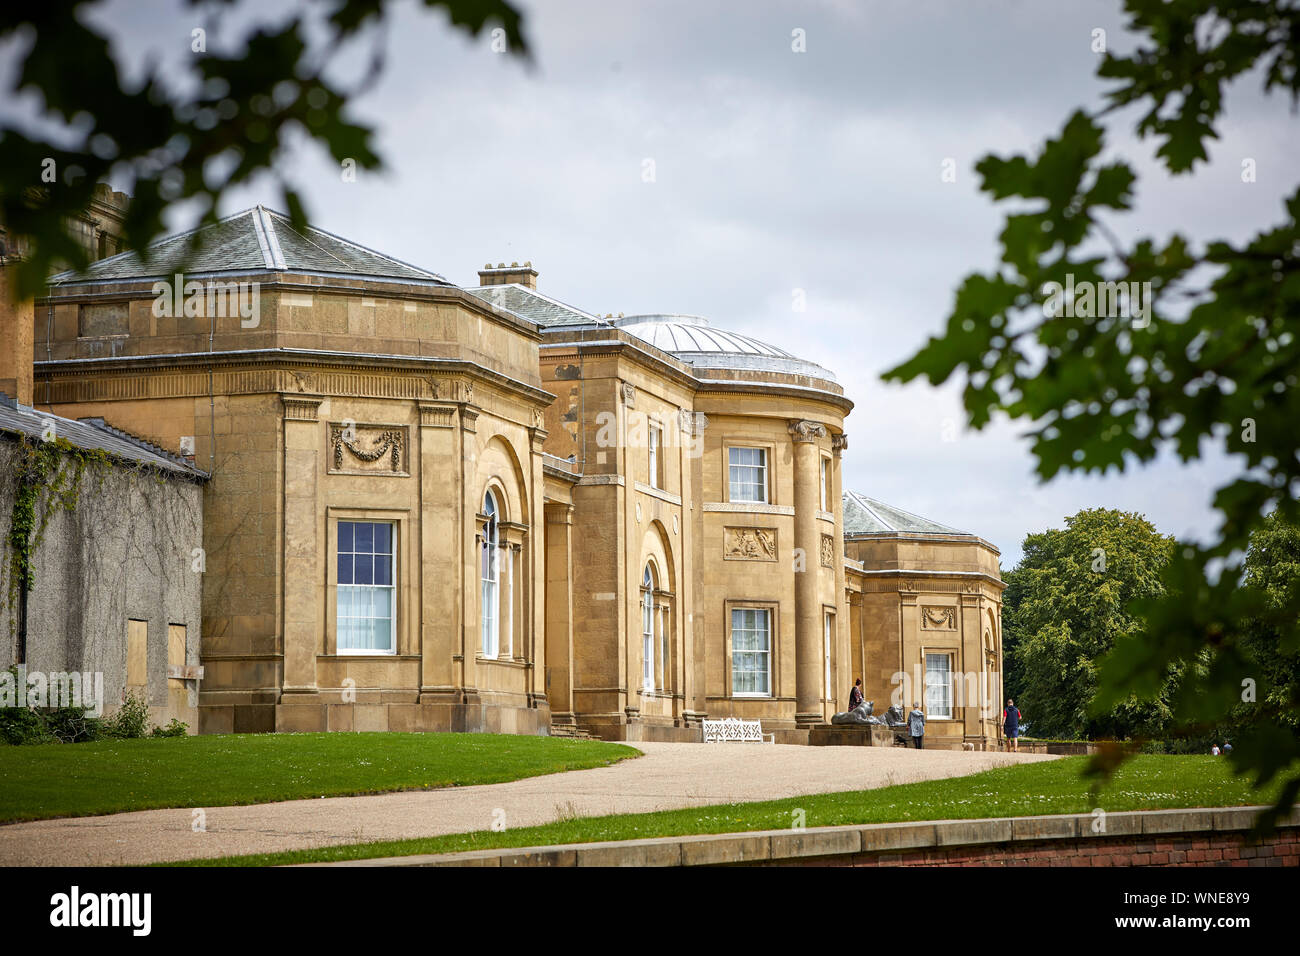 Sandstone large Grade I listed, neoclassical 18th century country house, Heaton Hall in Heaton Park Stock Photo